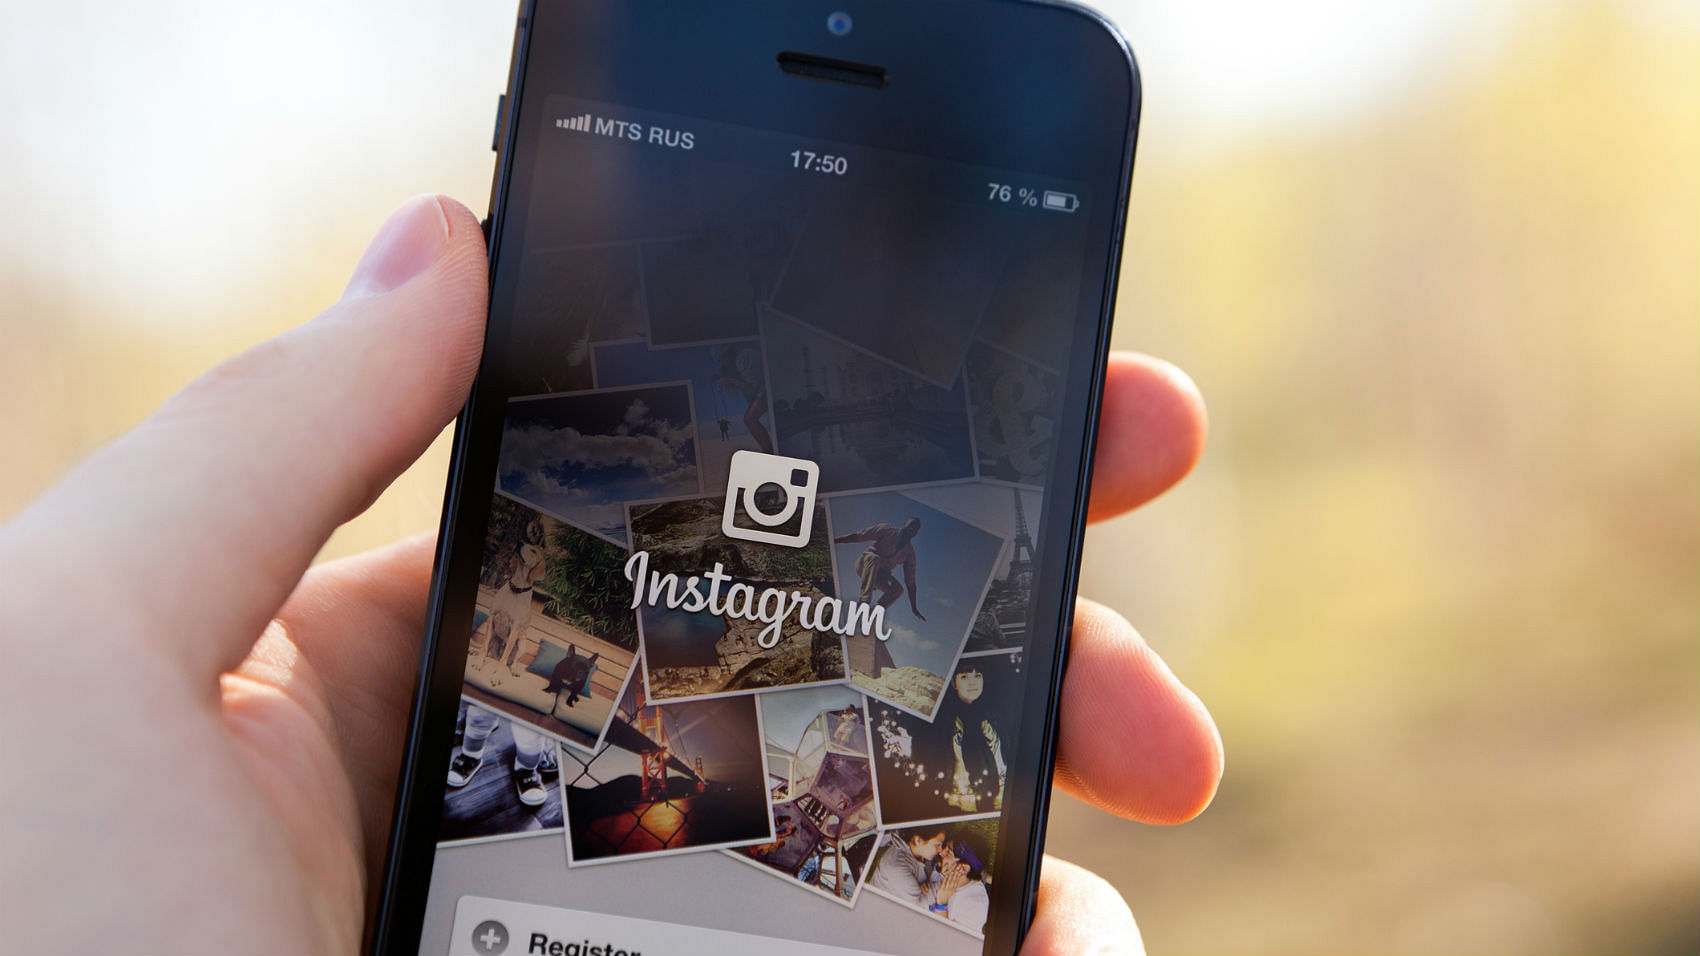 Everyone had a break on Monday when Instagram went down. (Photo: iStock)